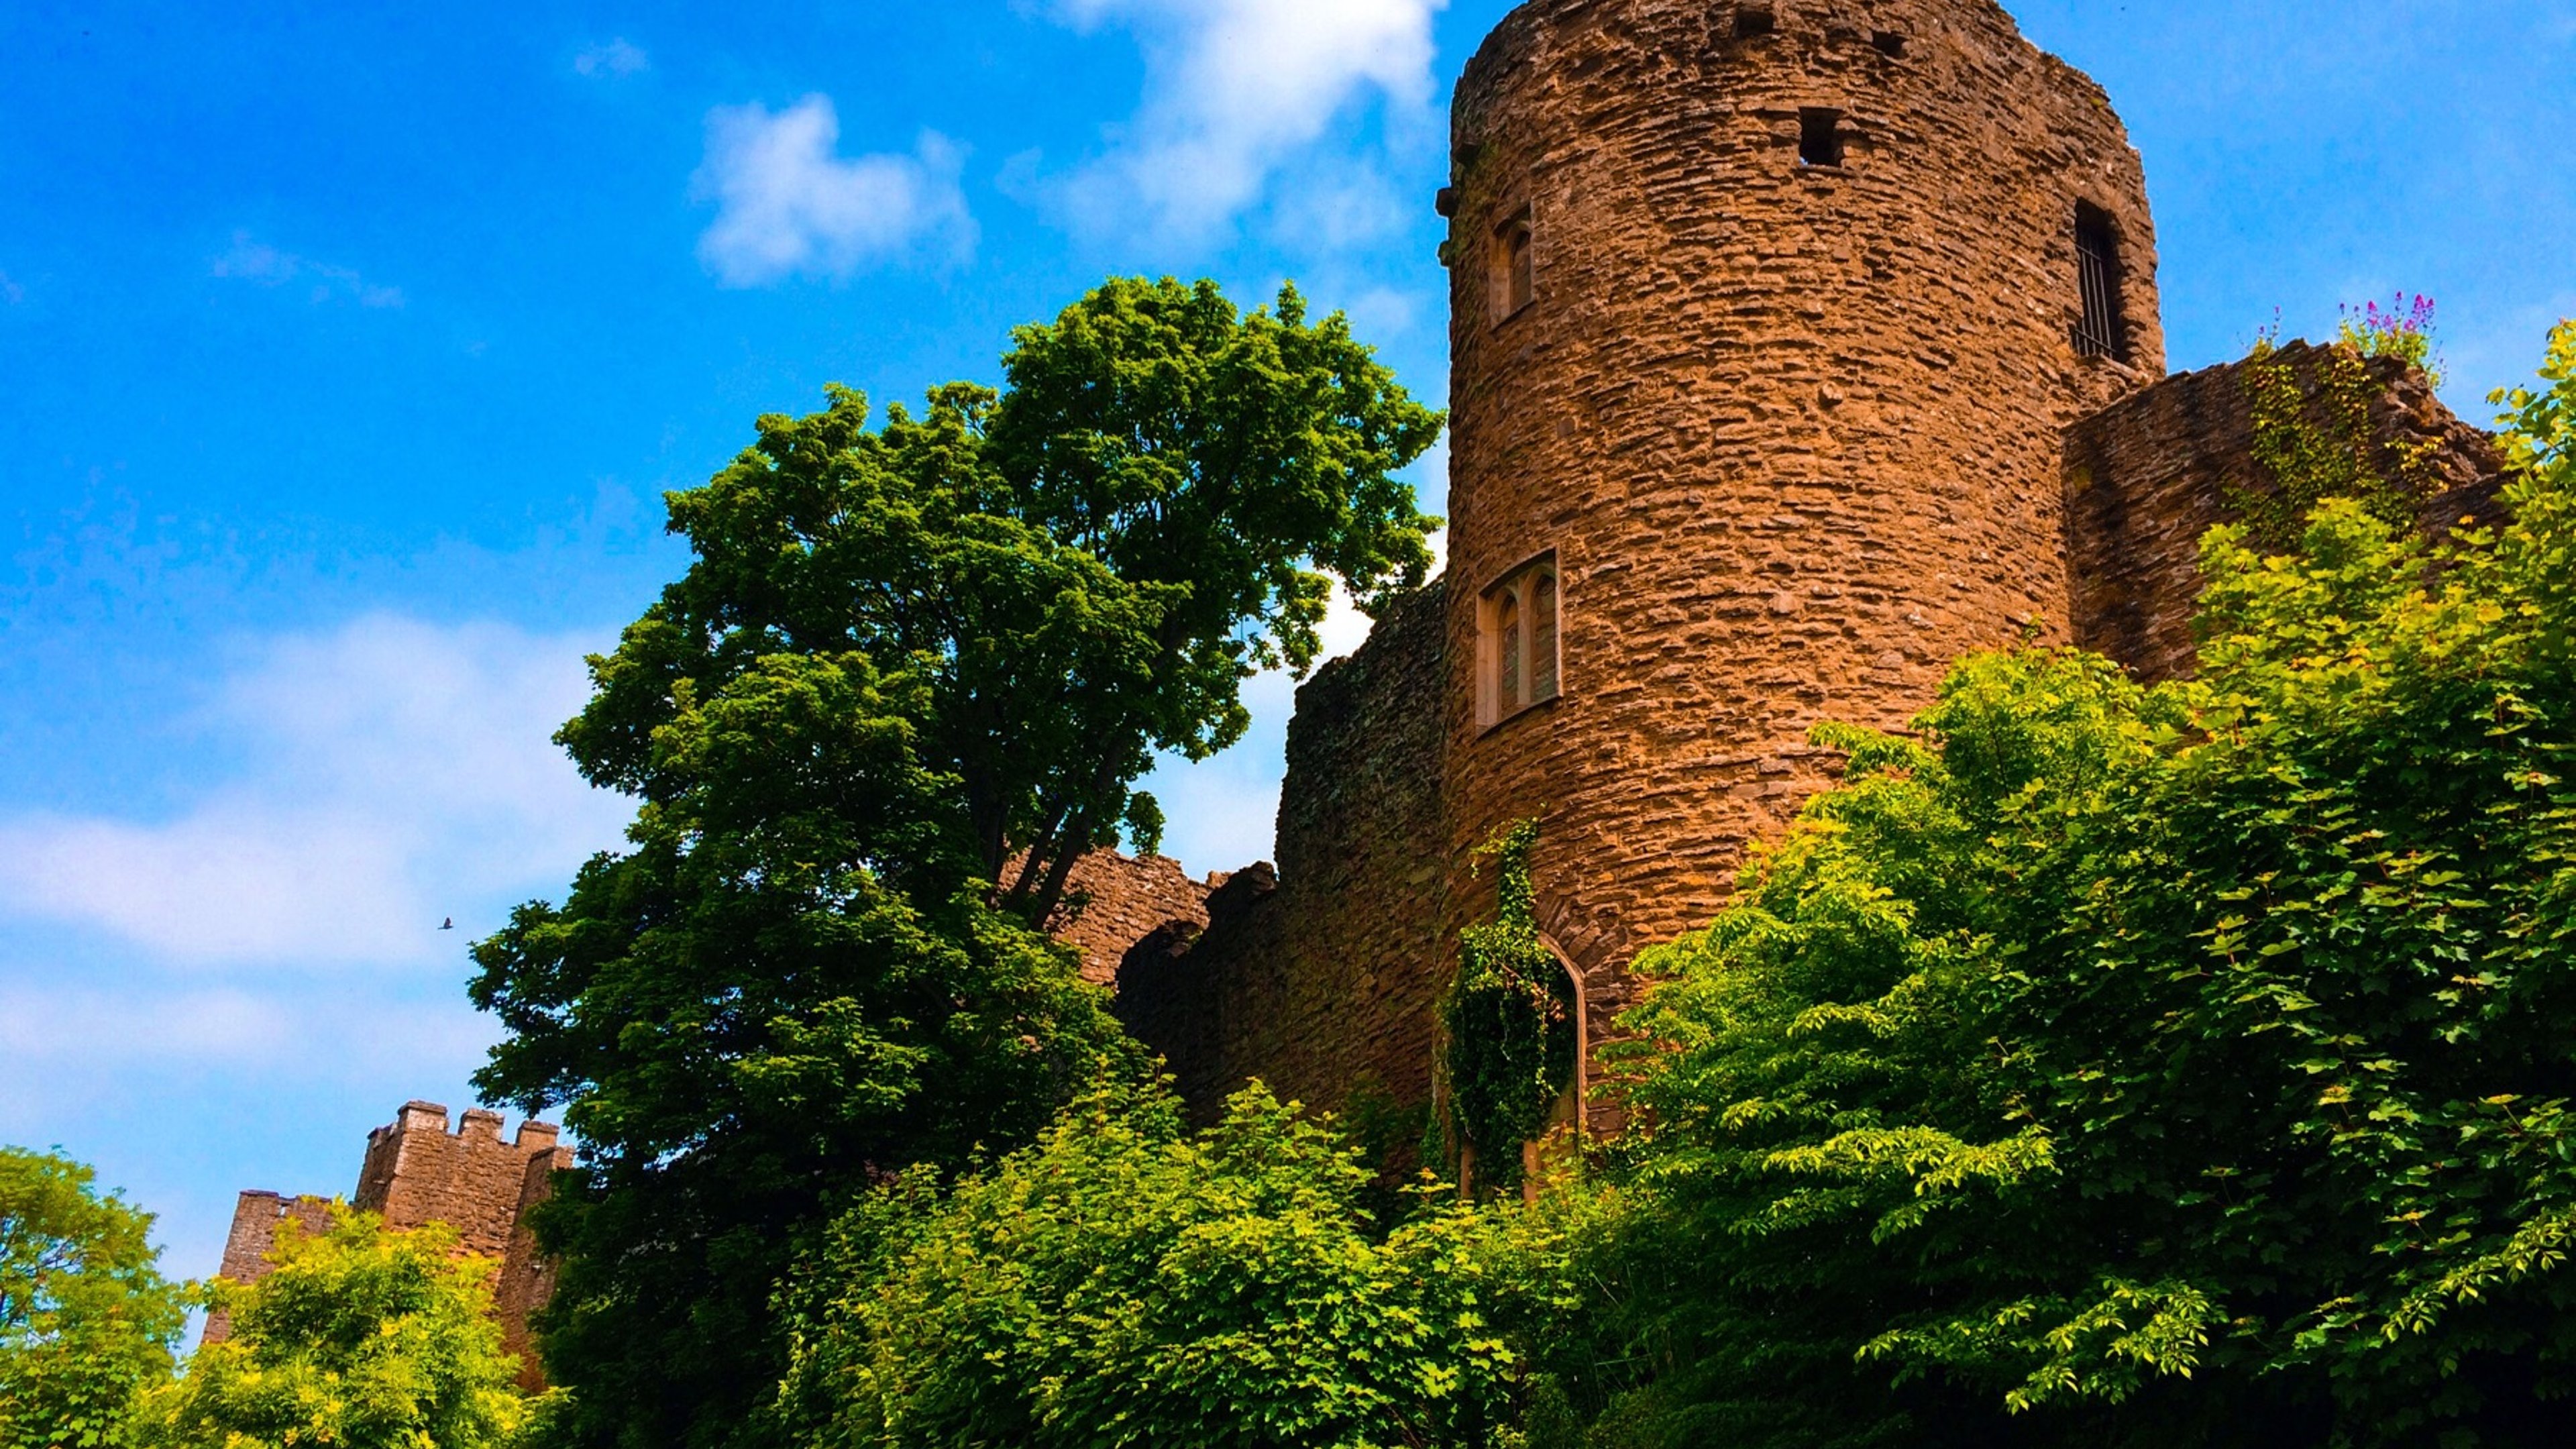 A tower at Ludlow Castle